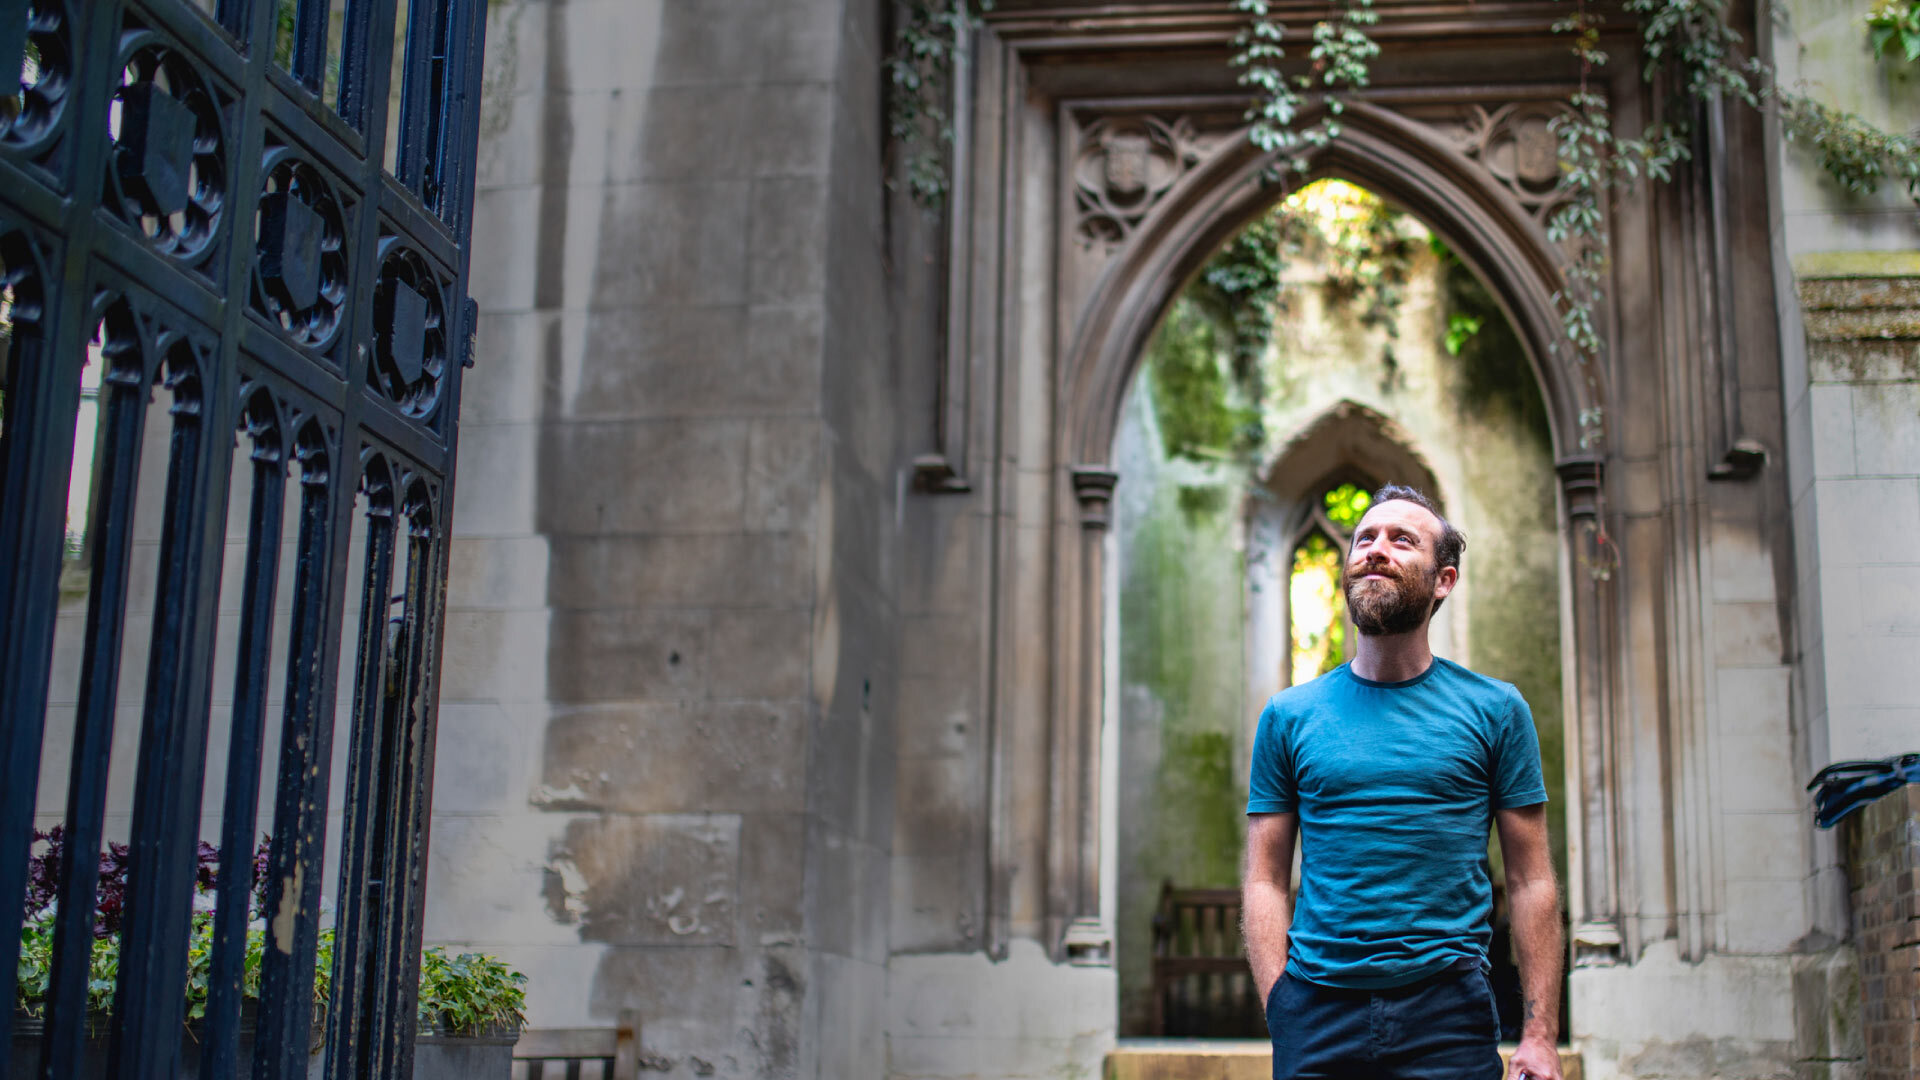 8 best Instagrammable places in London - St Dunstan in the East - man looking up at rol plant covered church ruins